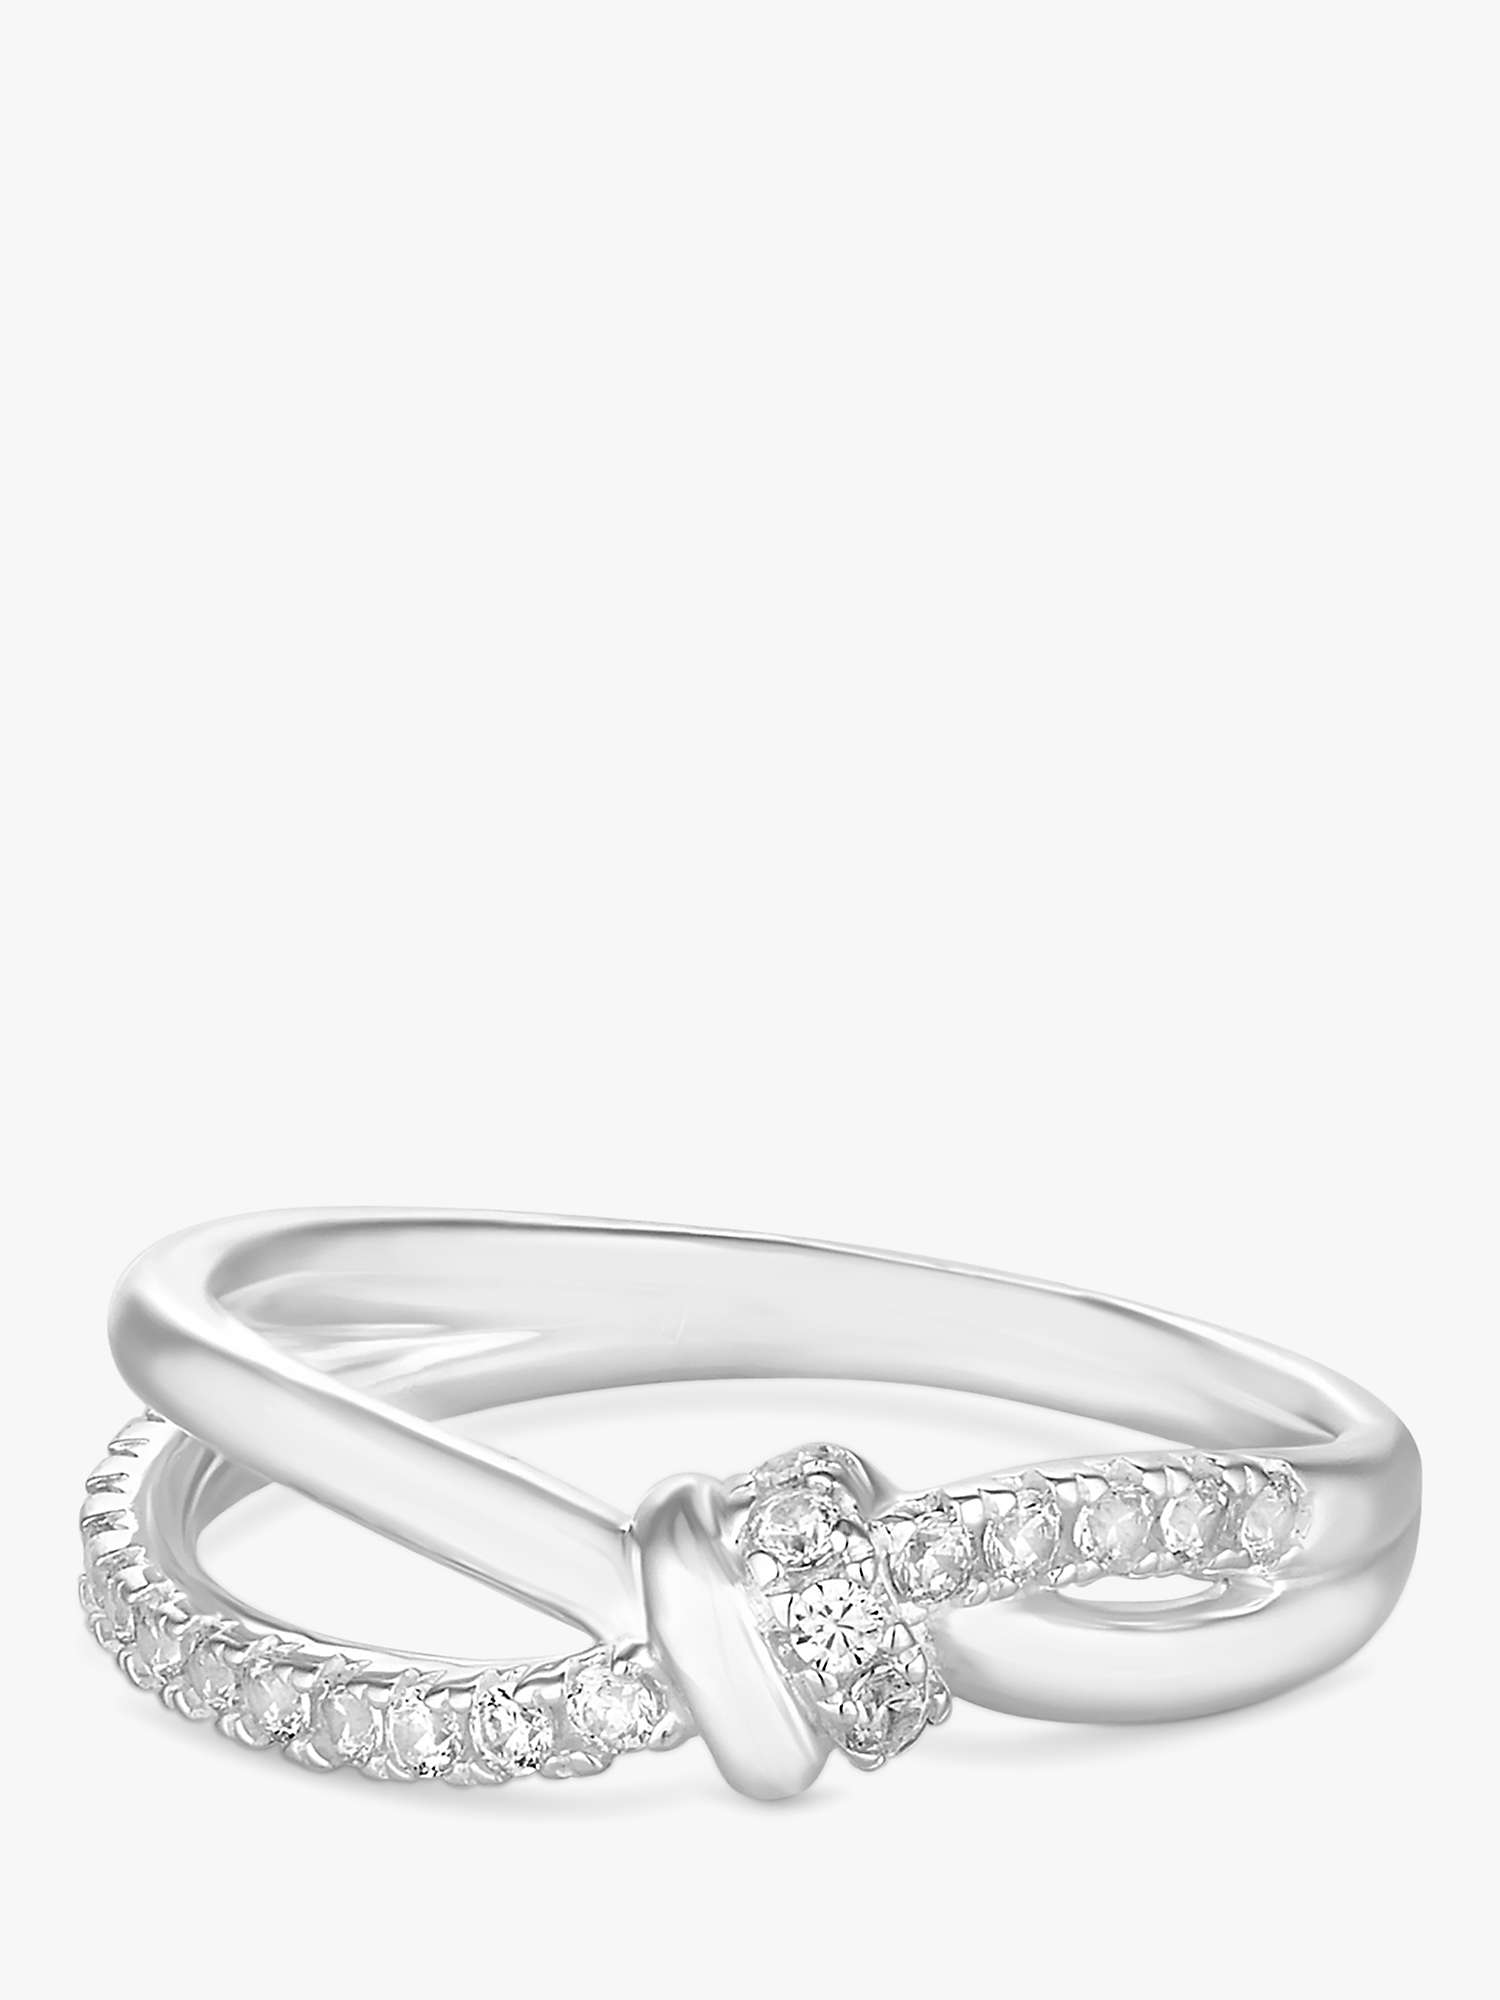 Buy Simply Silver Cubic Zirconia Knot Ring, Silver Online at johnlewis.com